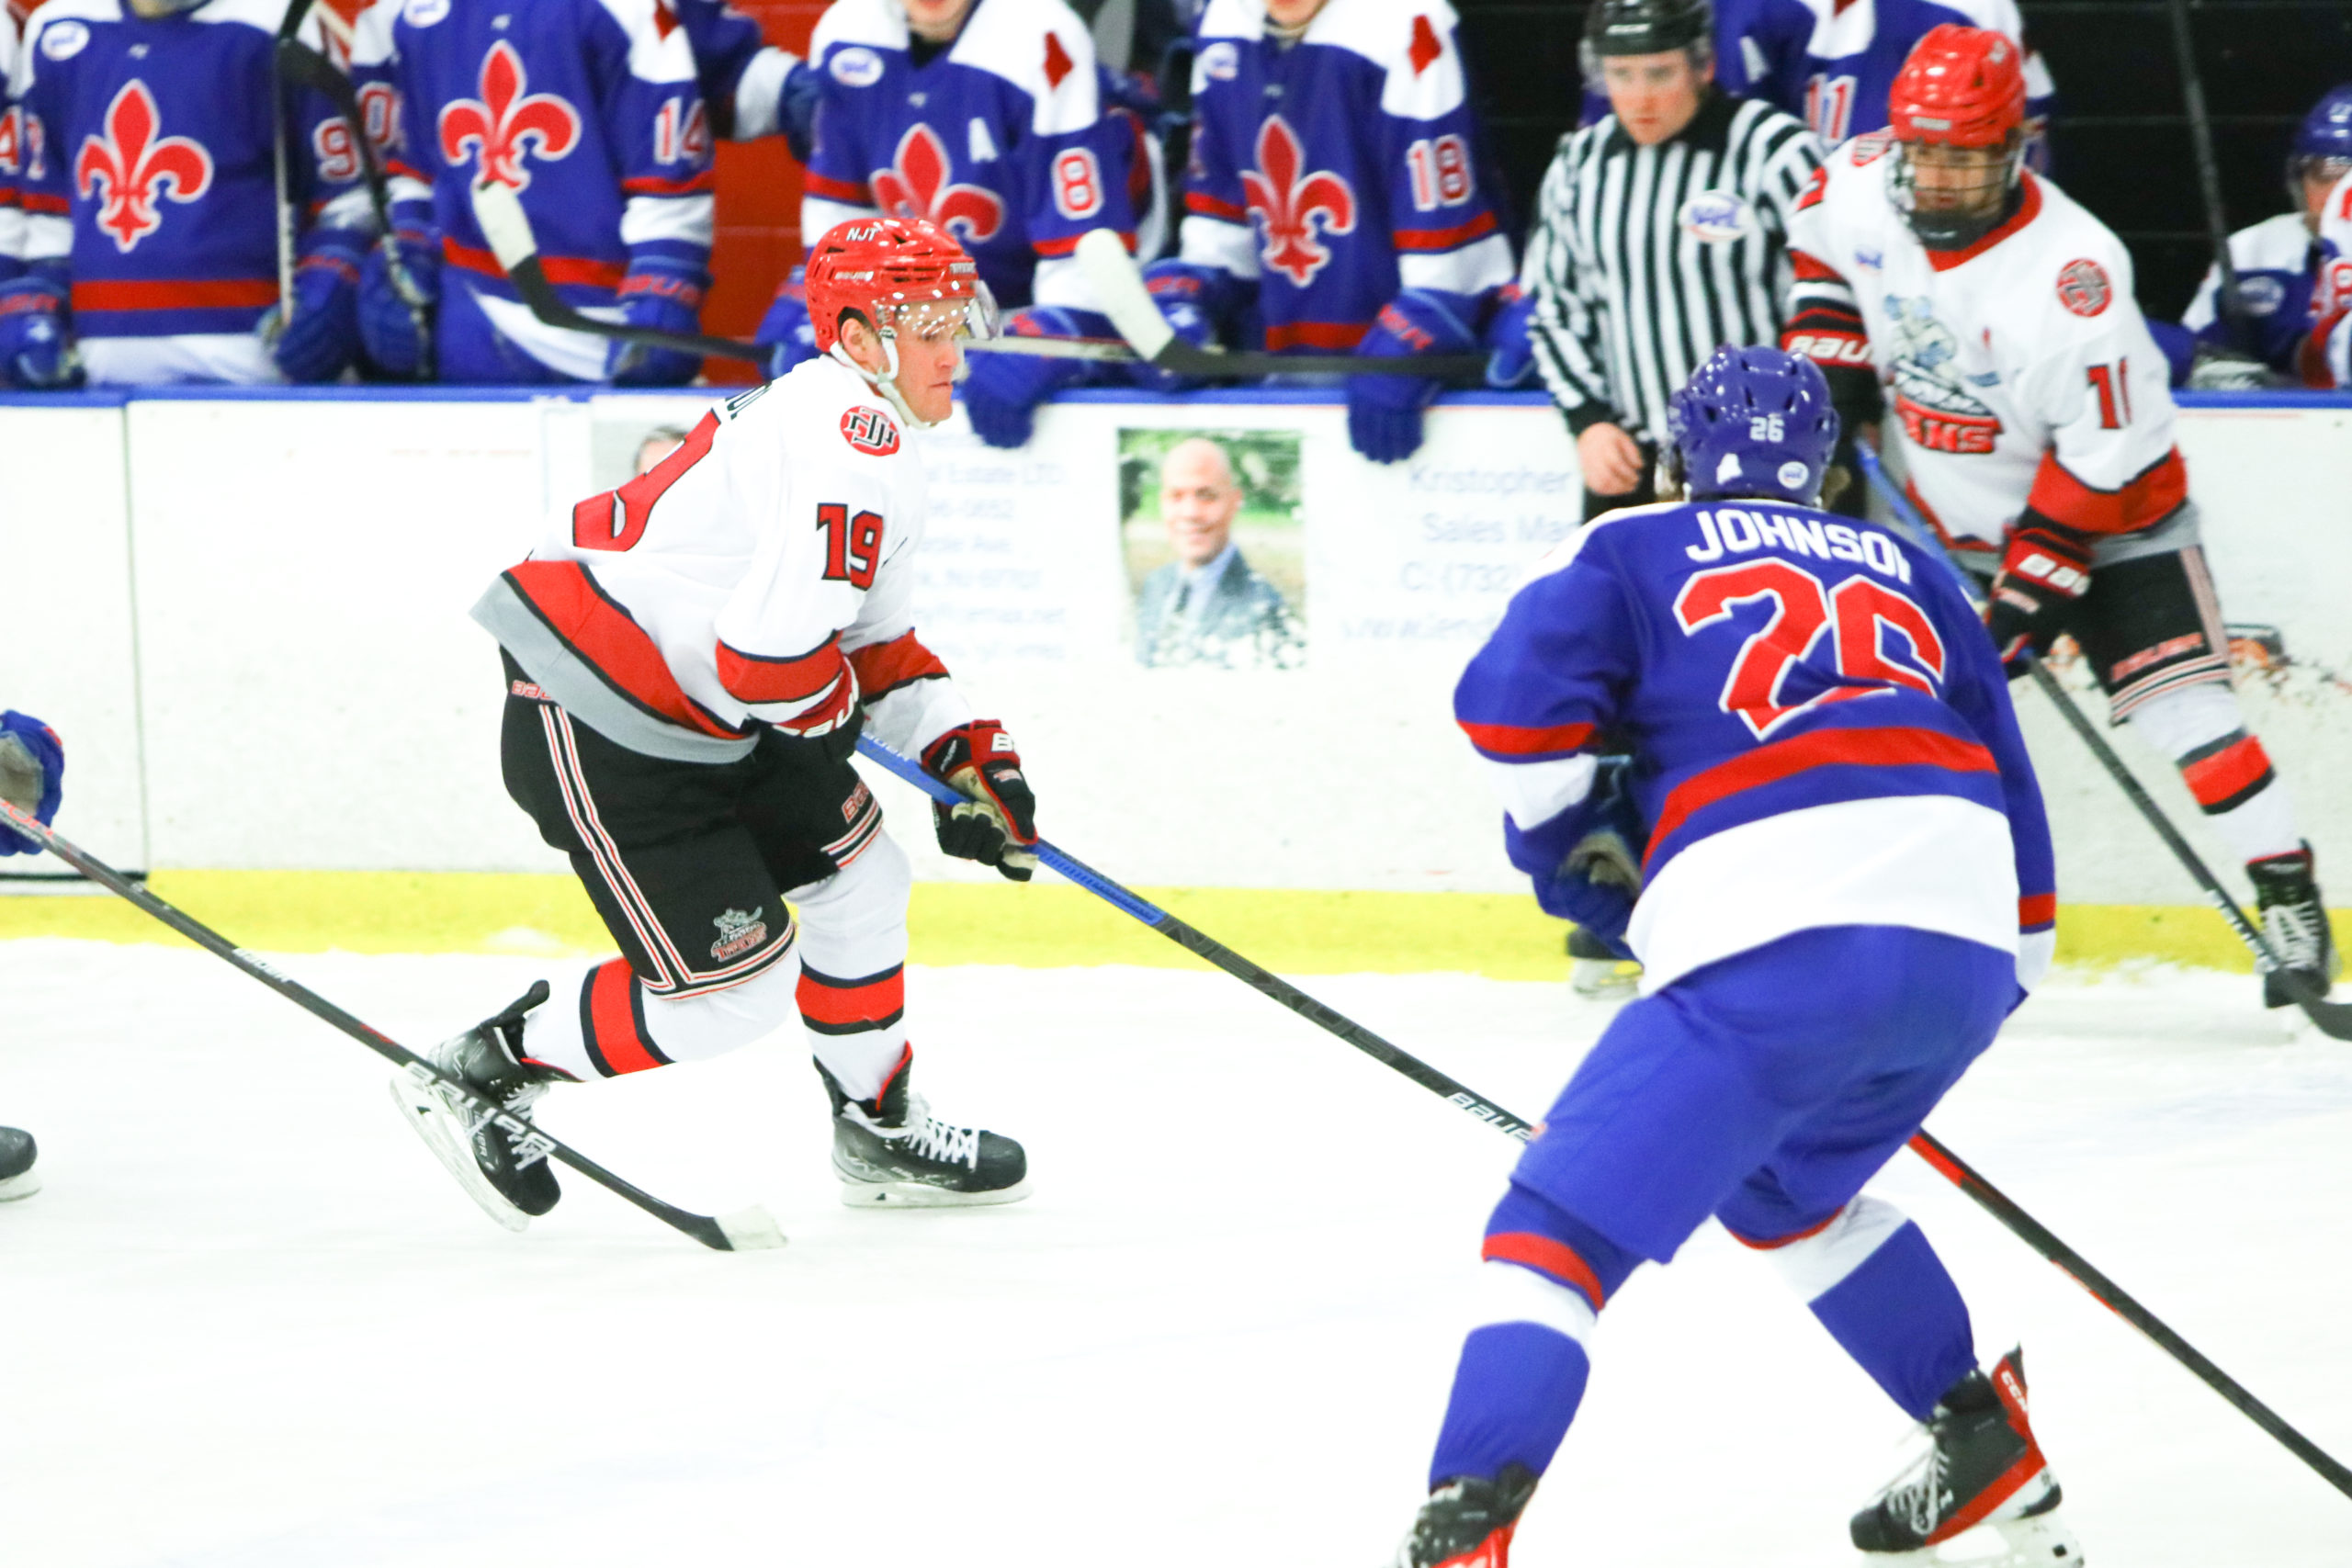 Weekend Preview – 3/11 & 3/12: Titans travel to Maine for last series against Nordiques